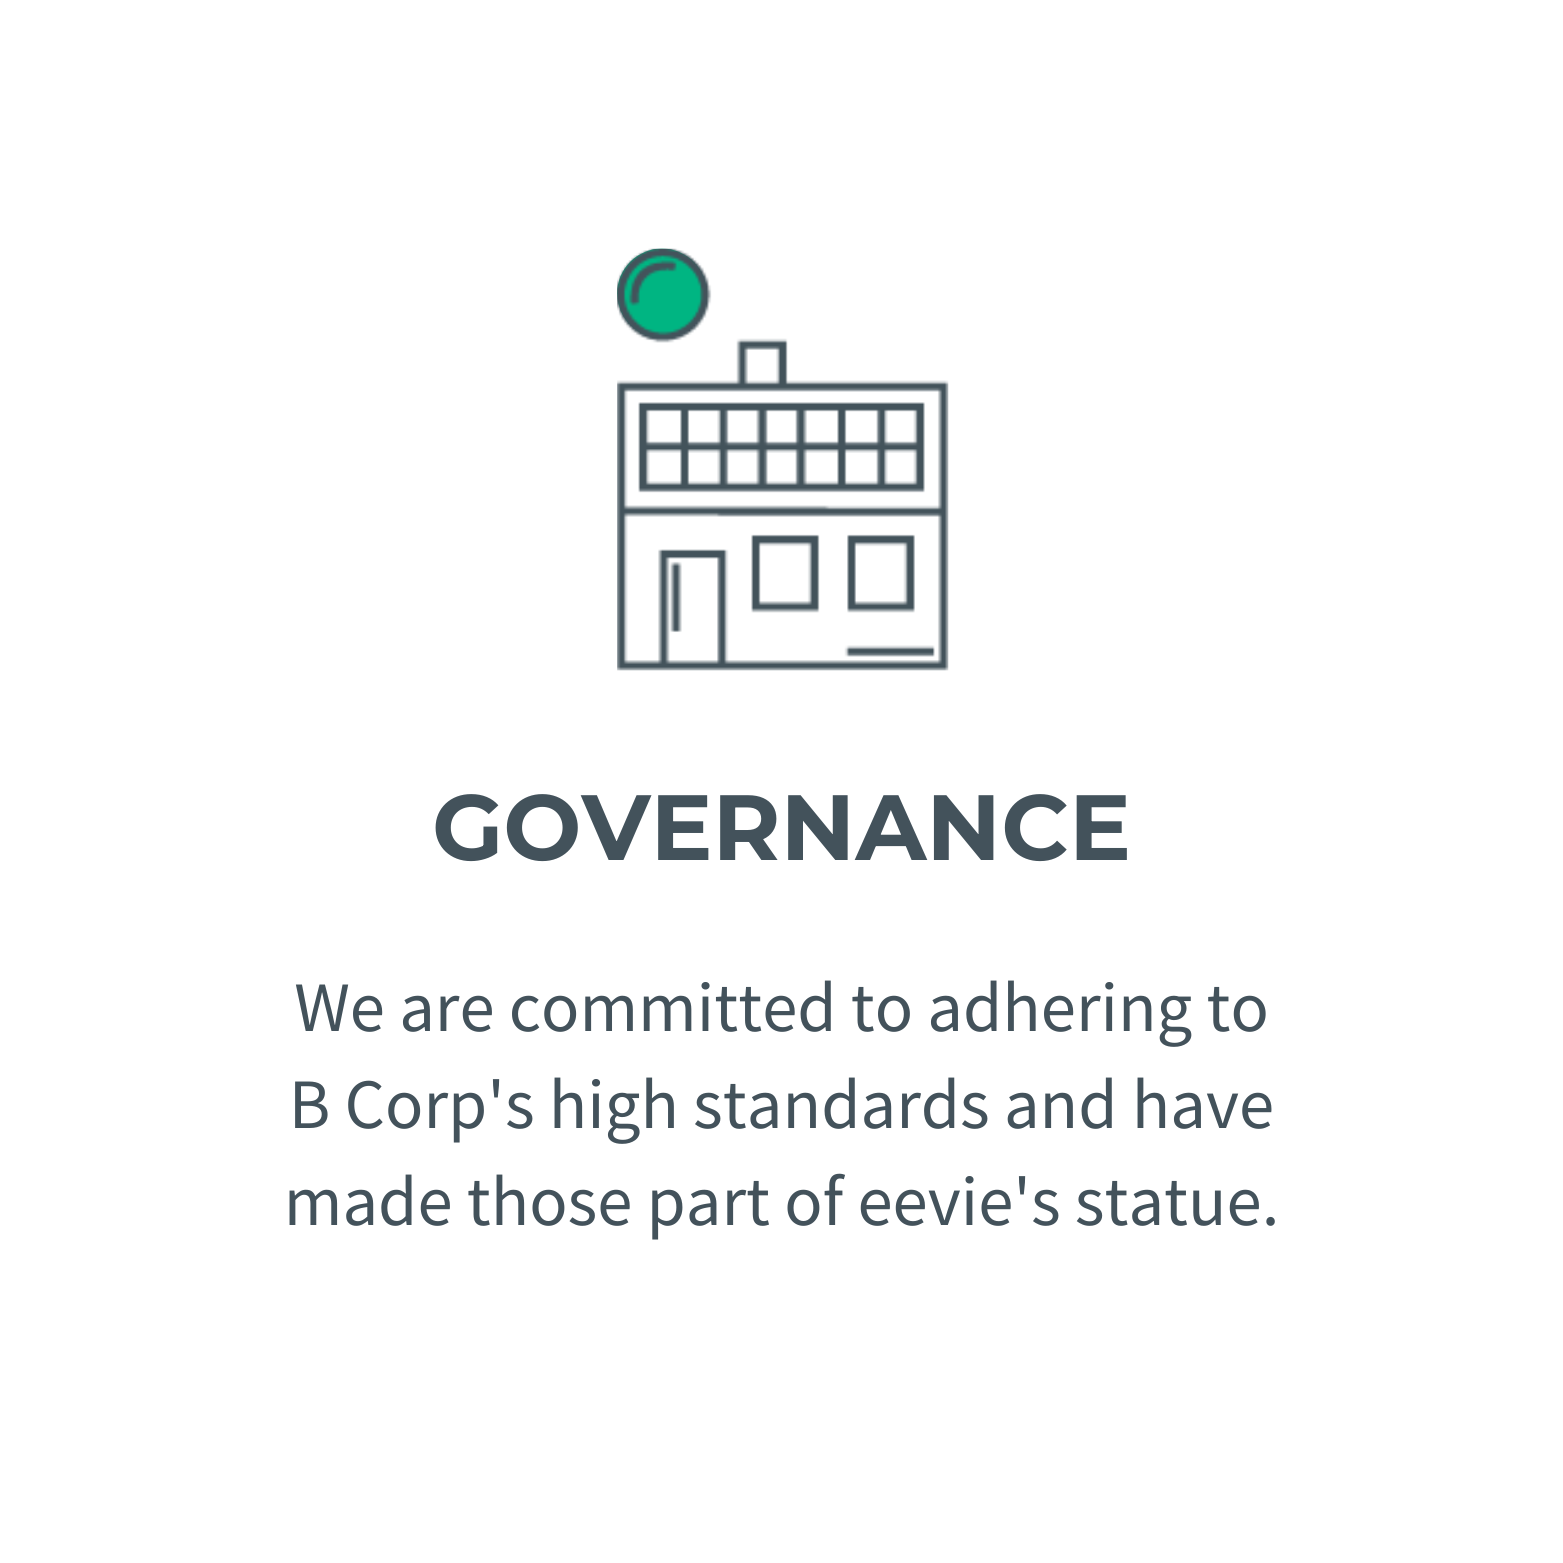  eevie is committed to adhering to B Corp’s high standards.  